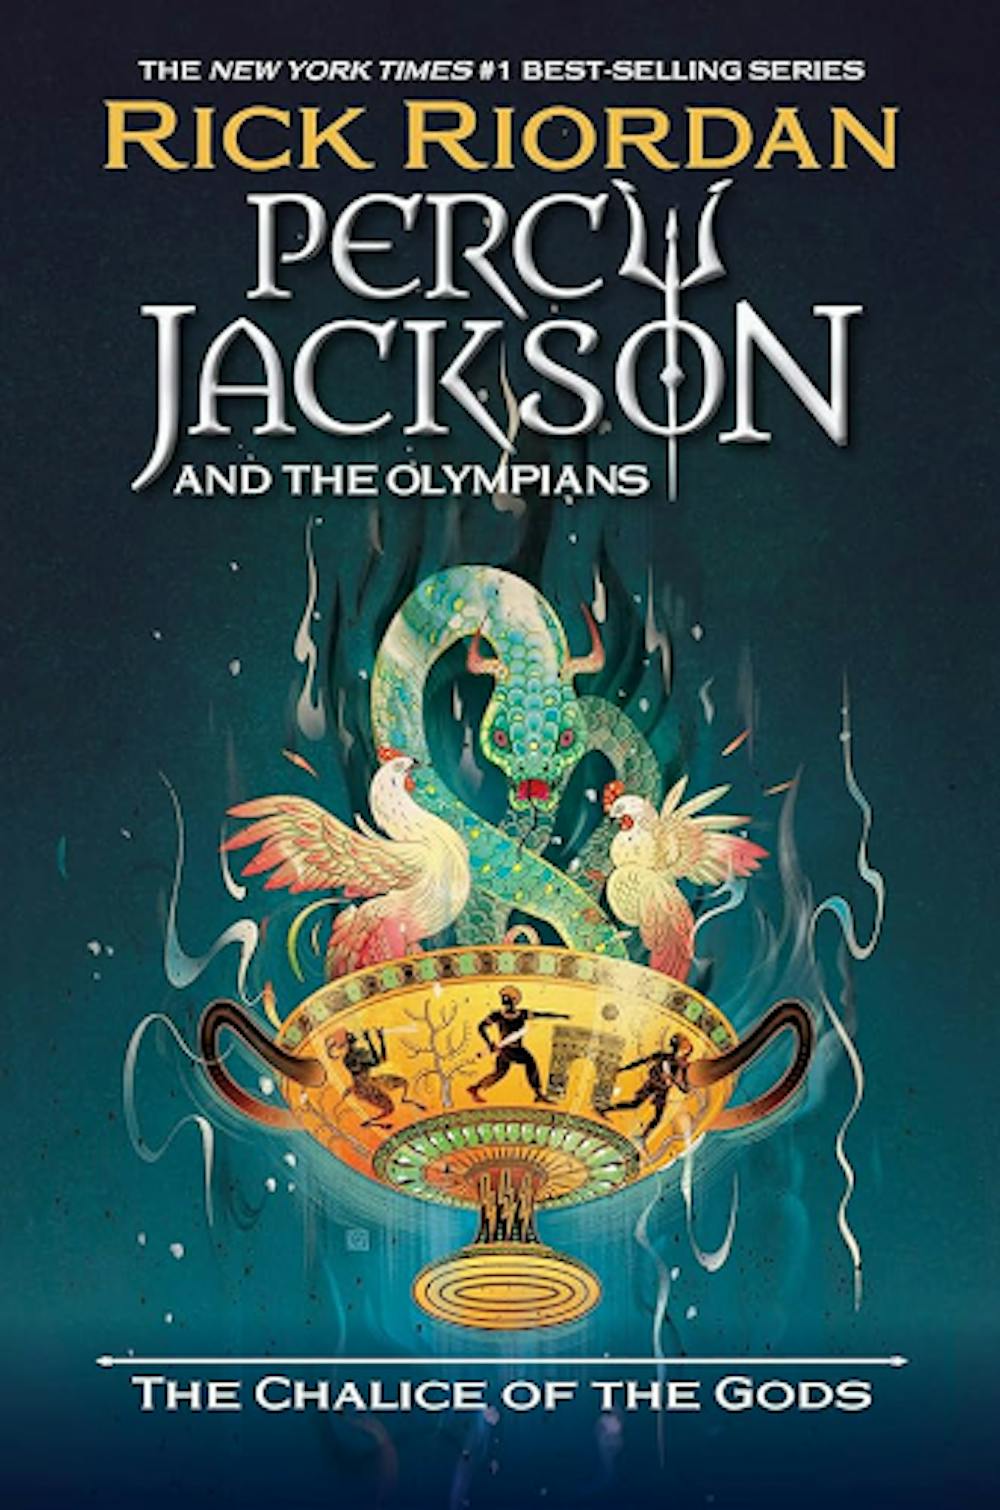 <p><em>While Riordan has steadily released novels in the universe since 2005, this is his first return to a novel entirely focused on Percy (Photo courtesy of </em><a href="https://www.amazon.com/Percy-Jackson-Olympians-Chalice-Gods/dp/1368098177" target=""><em>Amazon</em></a><em>).</em></p>